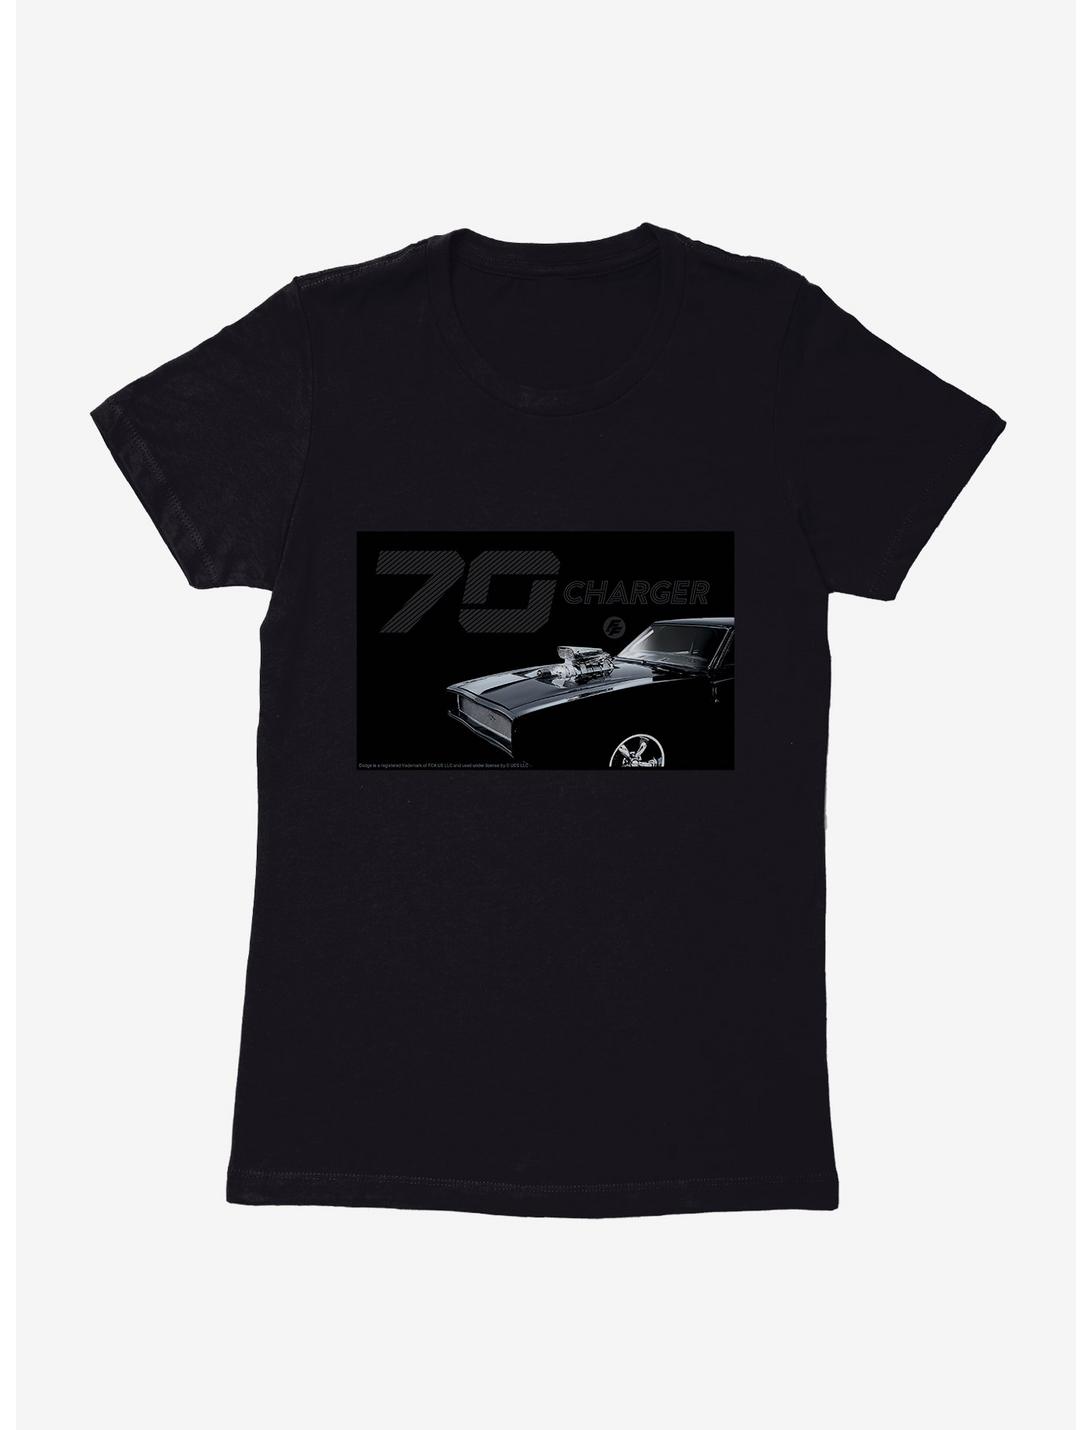 Fast & Furious '70 Charger Womens T-Shirt, BLACK, hi-res